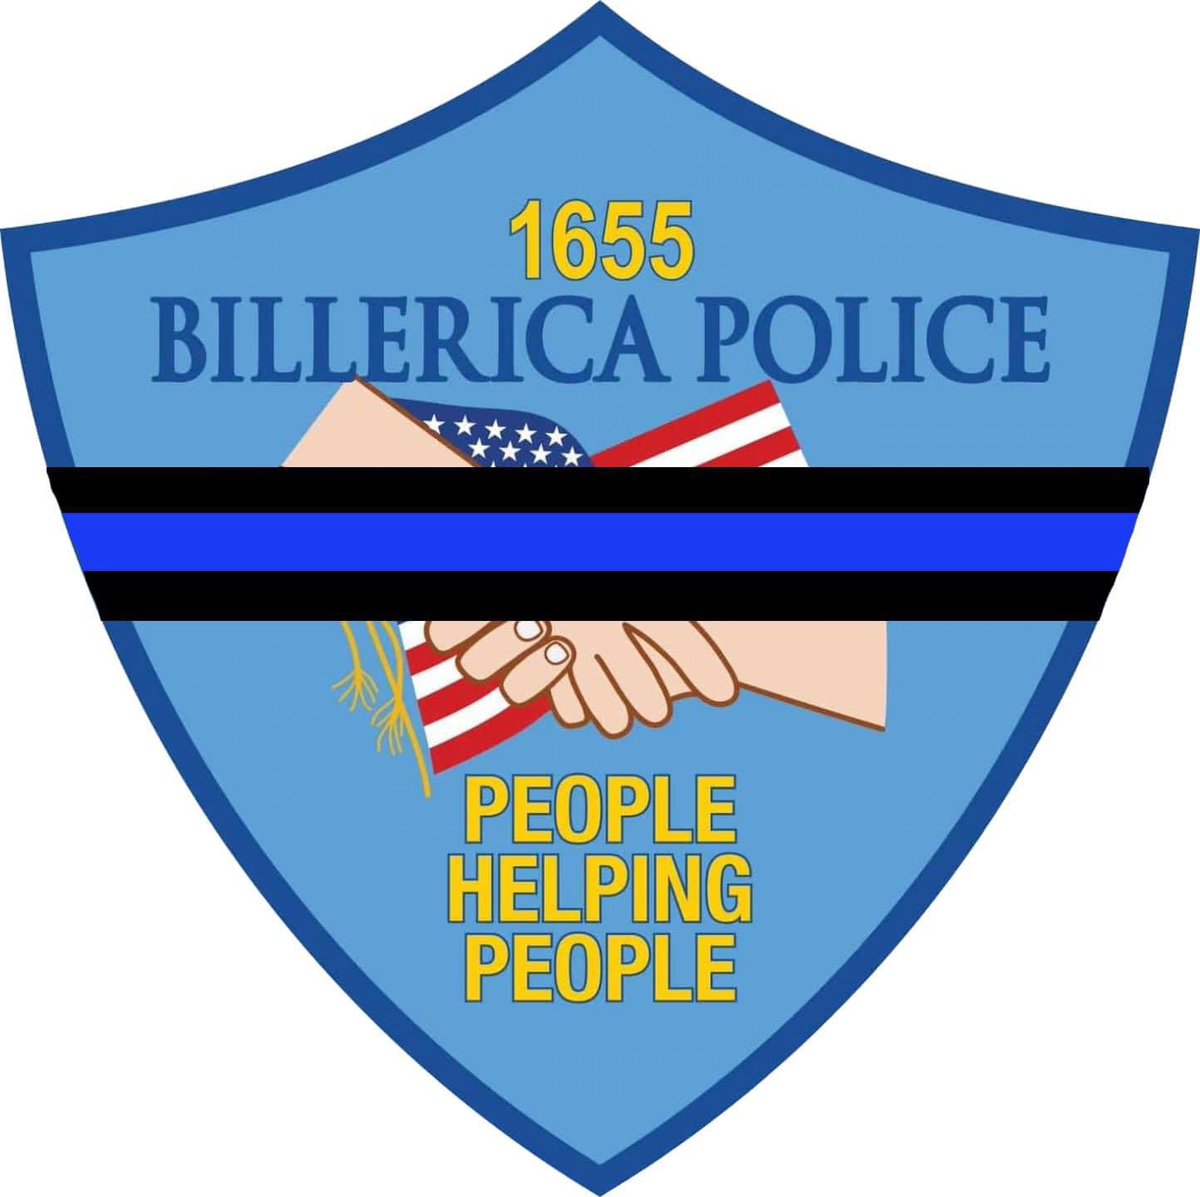 We are deeply saddened by the sudden and tragic passing of Billerica Police Sgt. Ian Taylor. Our thoughts and prayers are with his family and the men and women of the Billerica Police Department. Rest in peace, Sergeant Taylor.